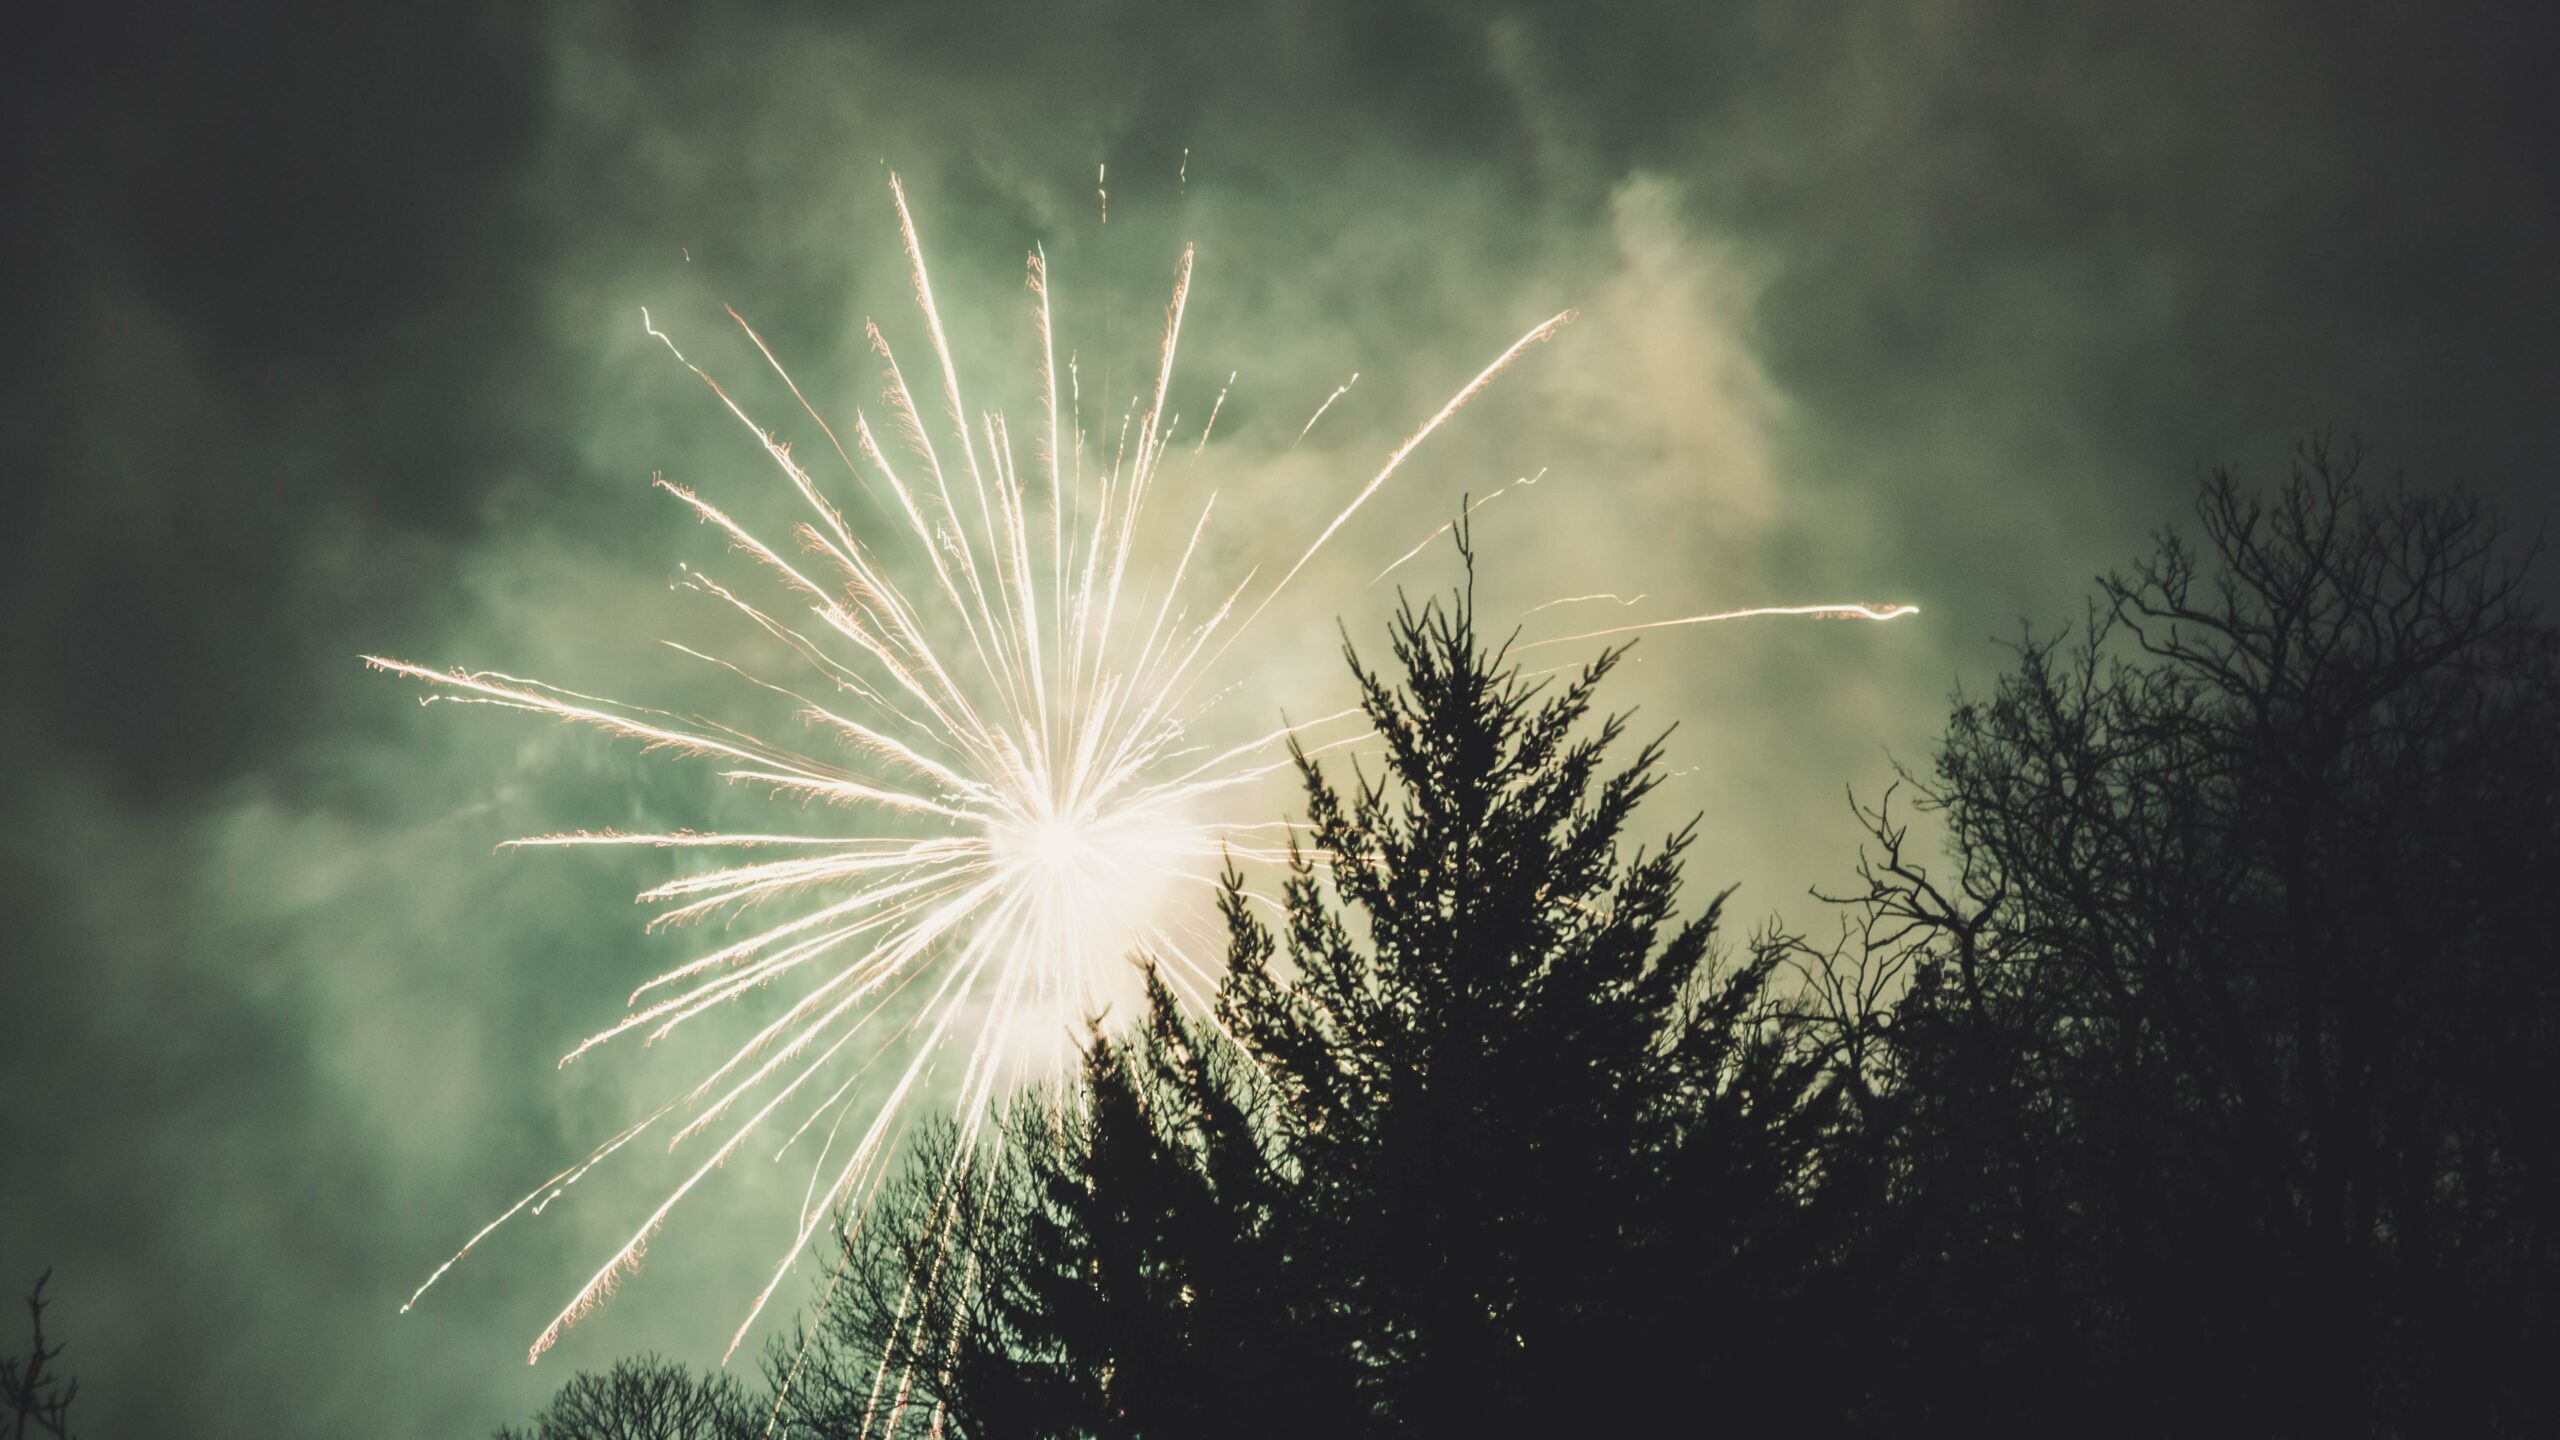 Fireworks in the sky behind a pine tree